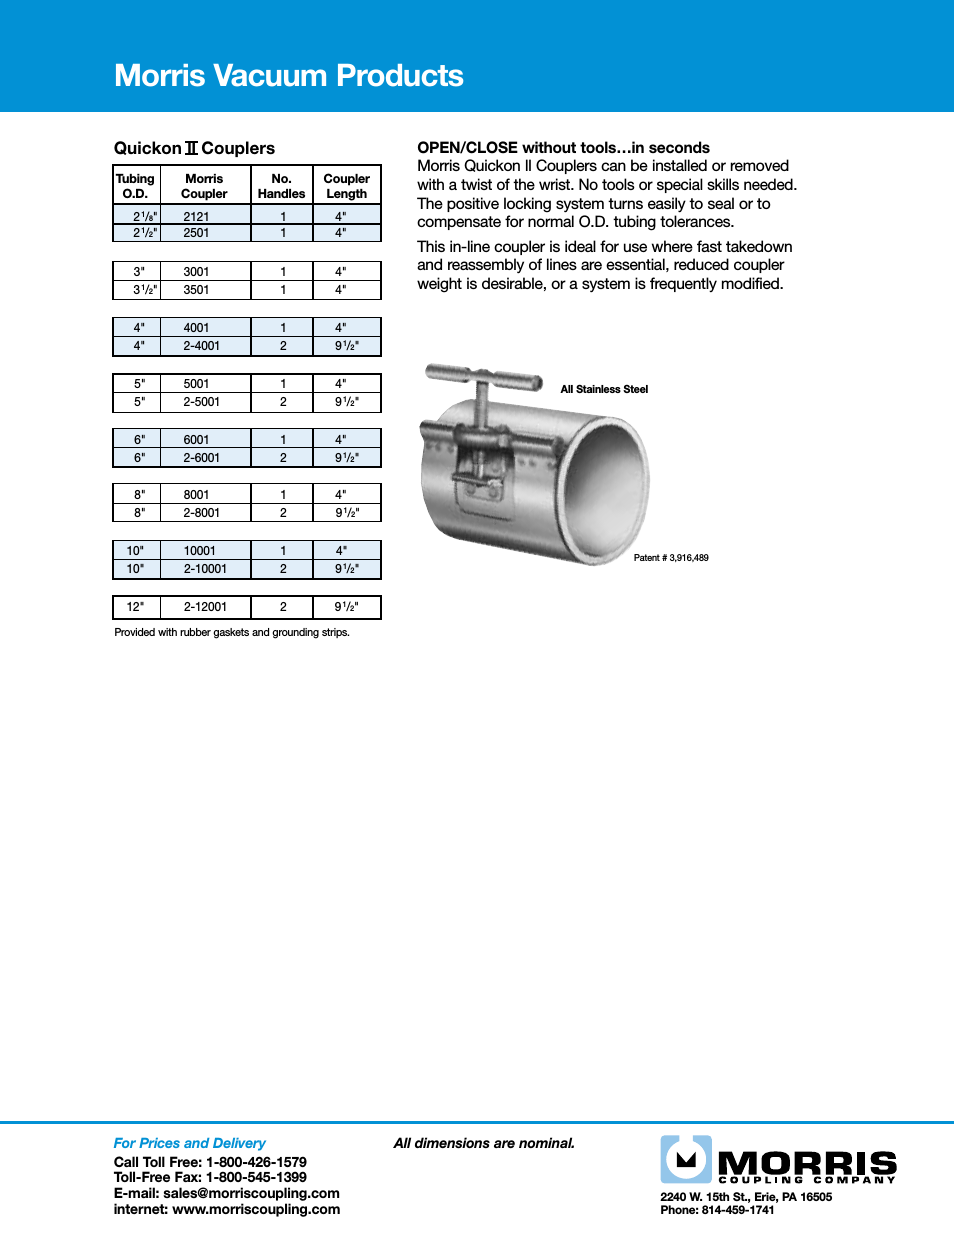 Vacuum Products - Quickon ll Couplers